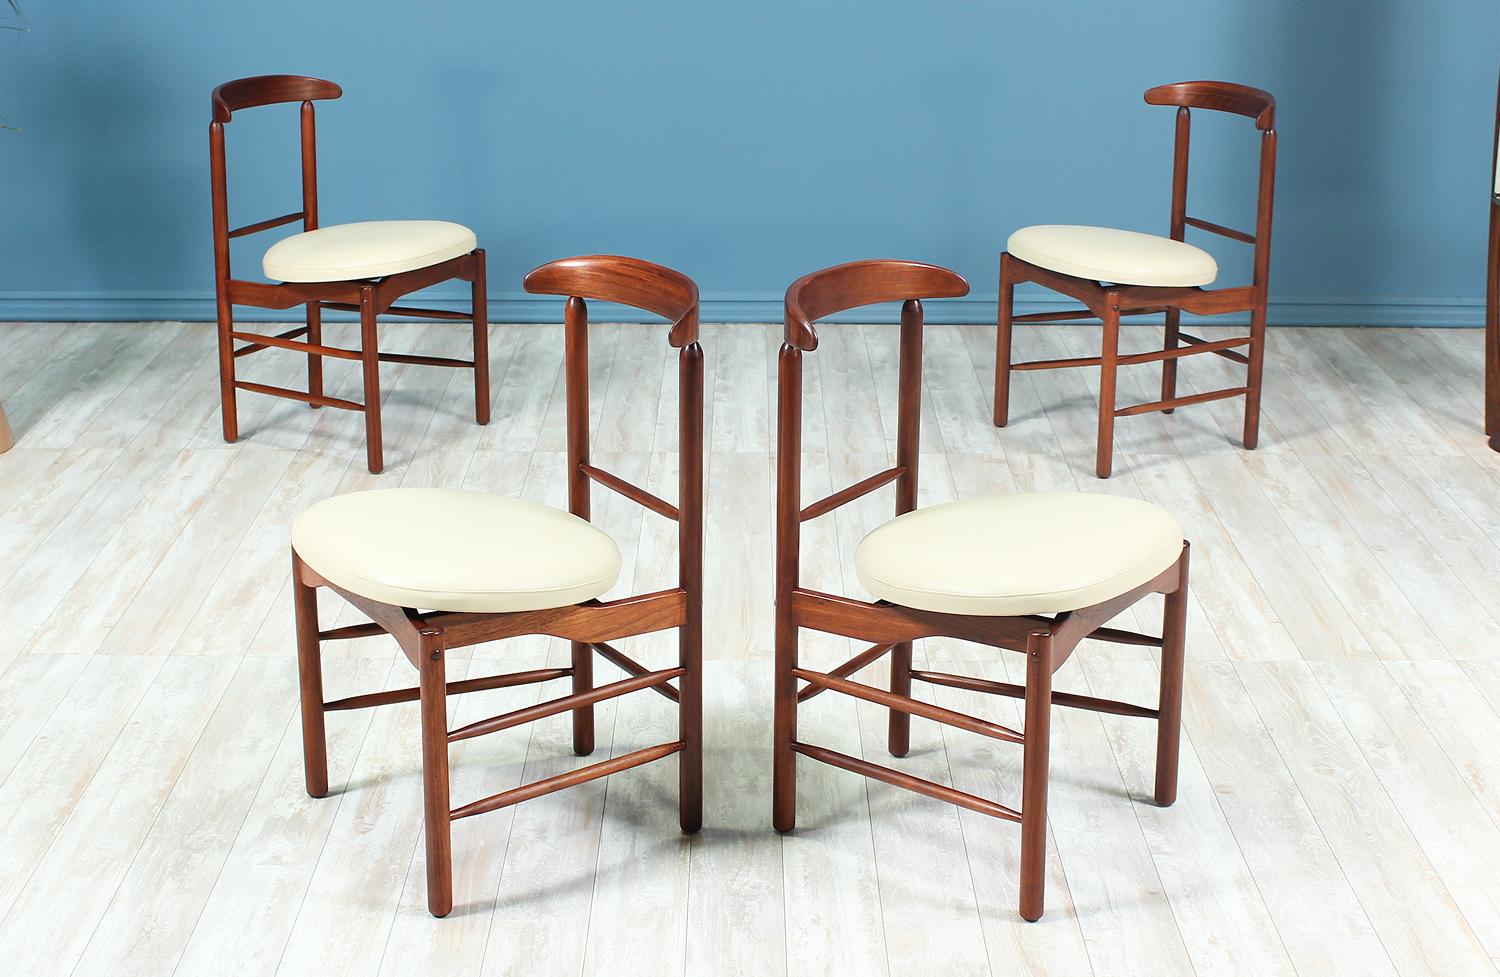 Set of four dining chairs designed by Greta M. Grossman for Glenn of California in the United States circa 1950s. All four chairs have been newly upholstered in a high-quality and comfortable white grain leather and feature a solid walnut wood frame